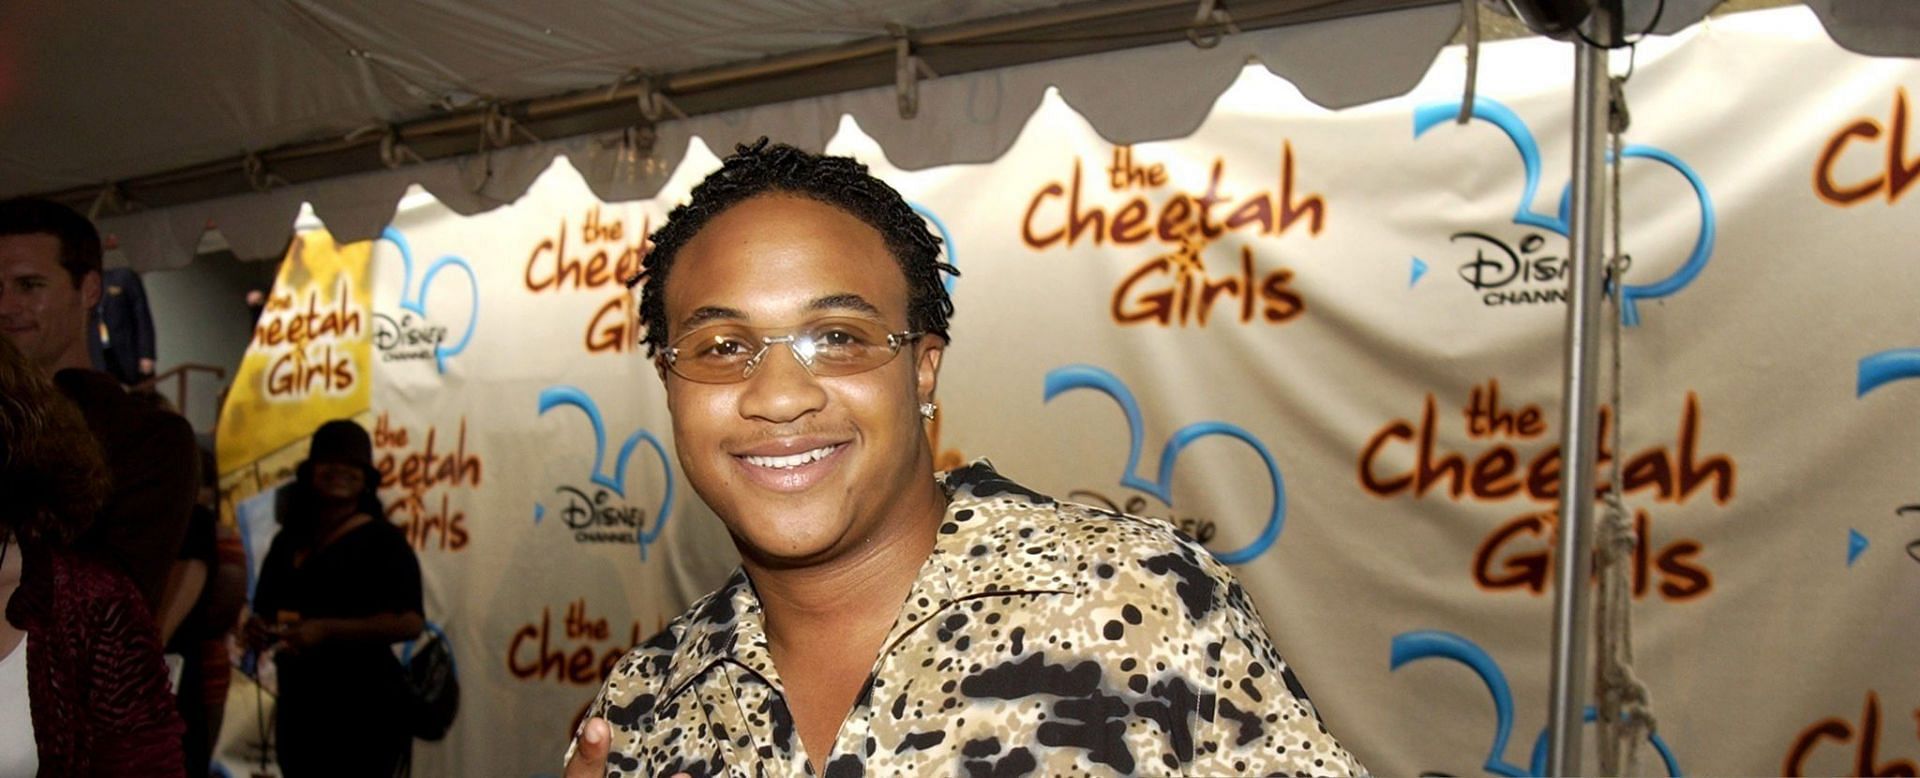 Orlando Brown&#039;s comments on Diddy sparked concern among fans (Image via Getty Images)